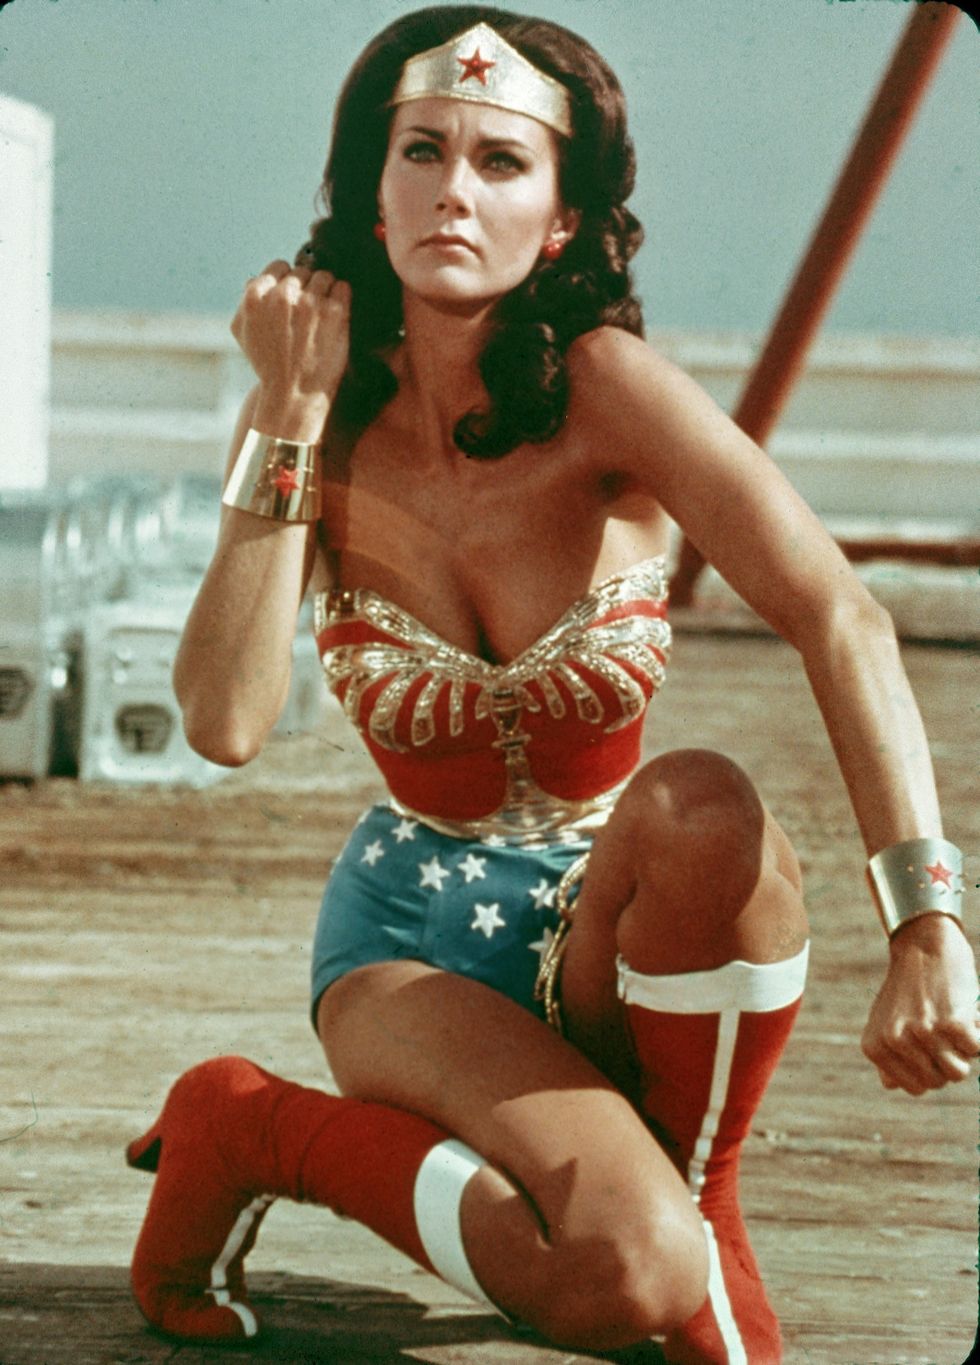 american actor lynda carter kneels on the ground and bears her forearm in a still from the television series wonder woman photo by warner brothersgetty images